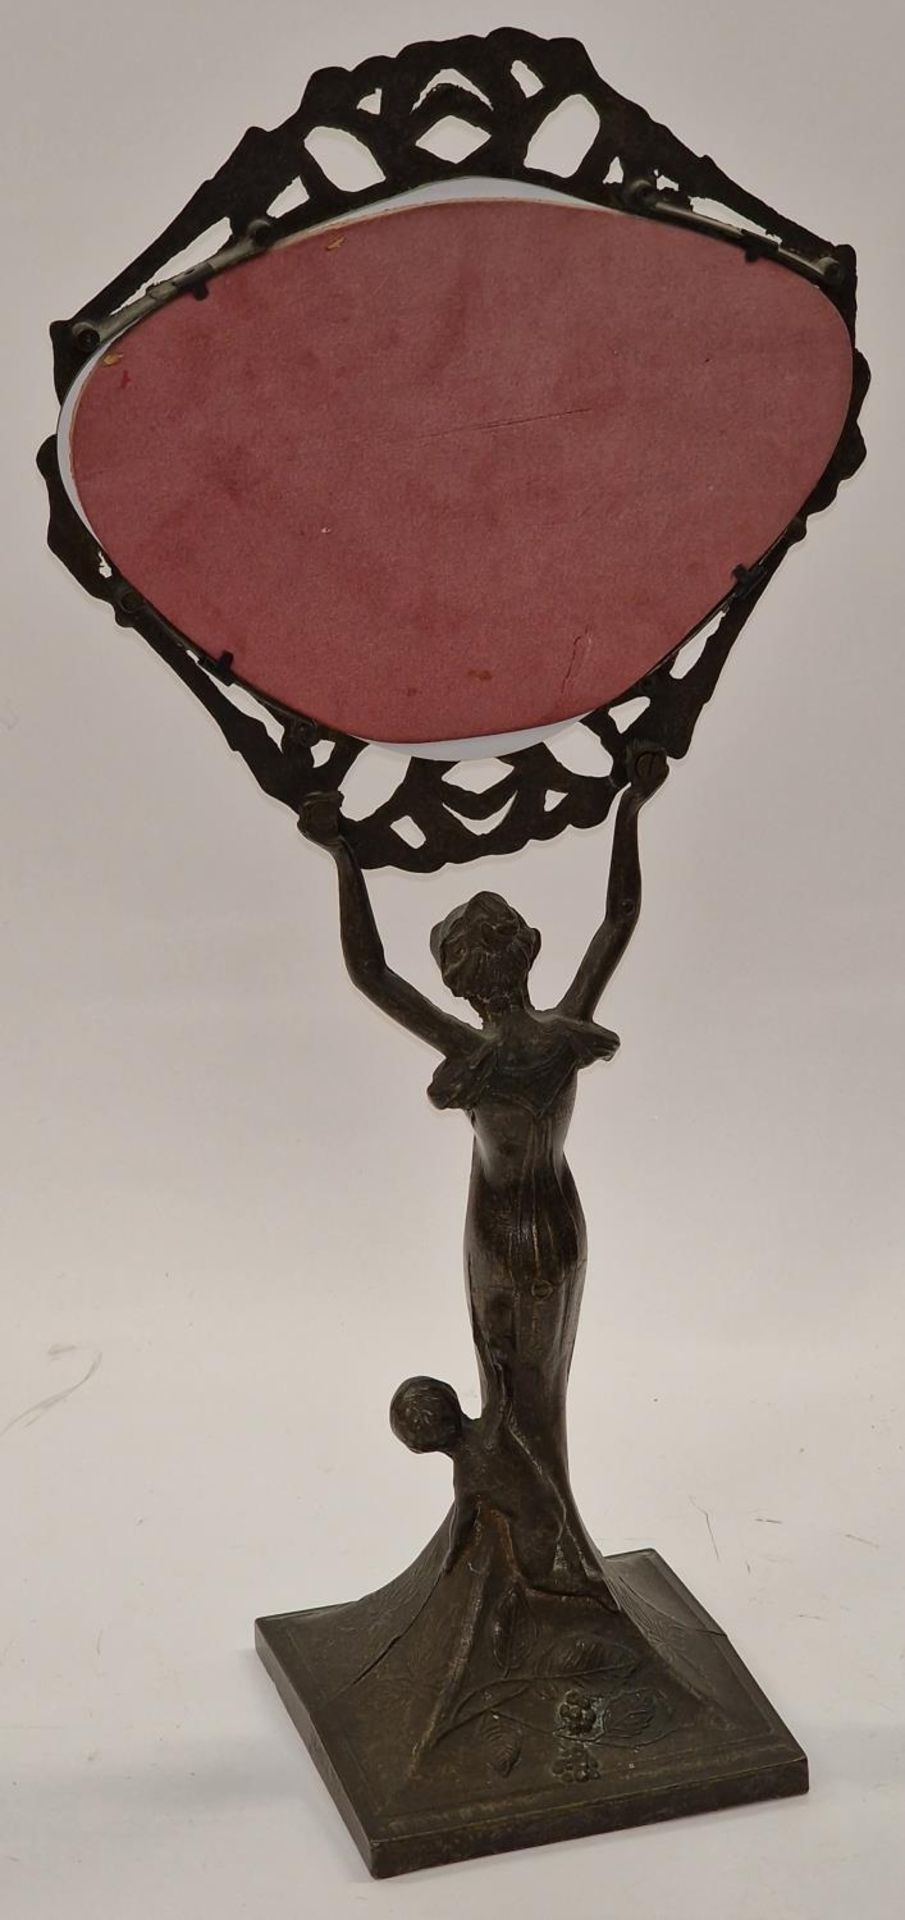 A decorative metal Art Nouveau style mirror depicting a lady 50cm tall. - Image 4 of 5